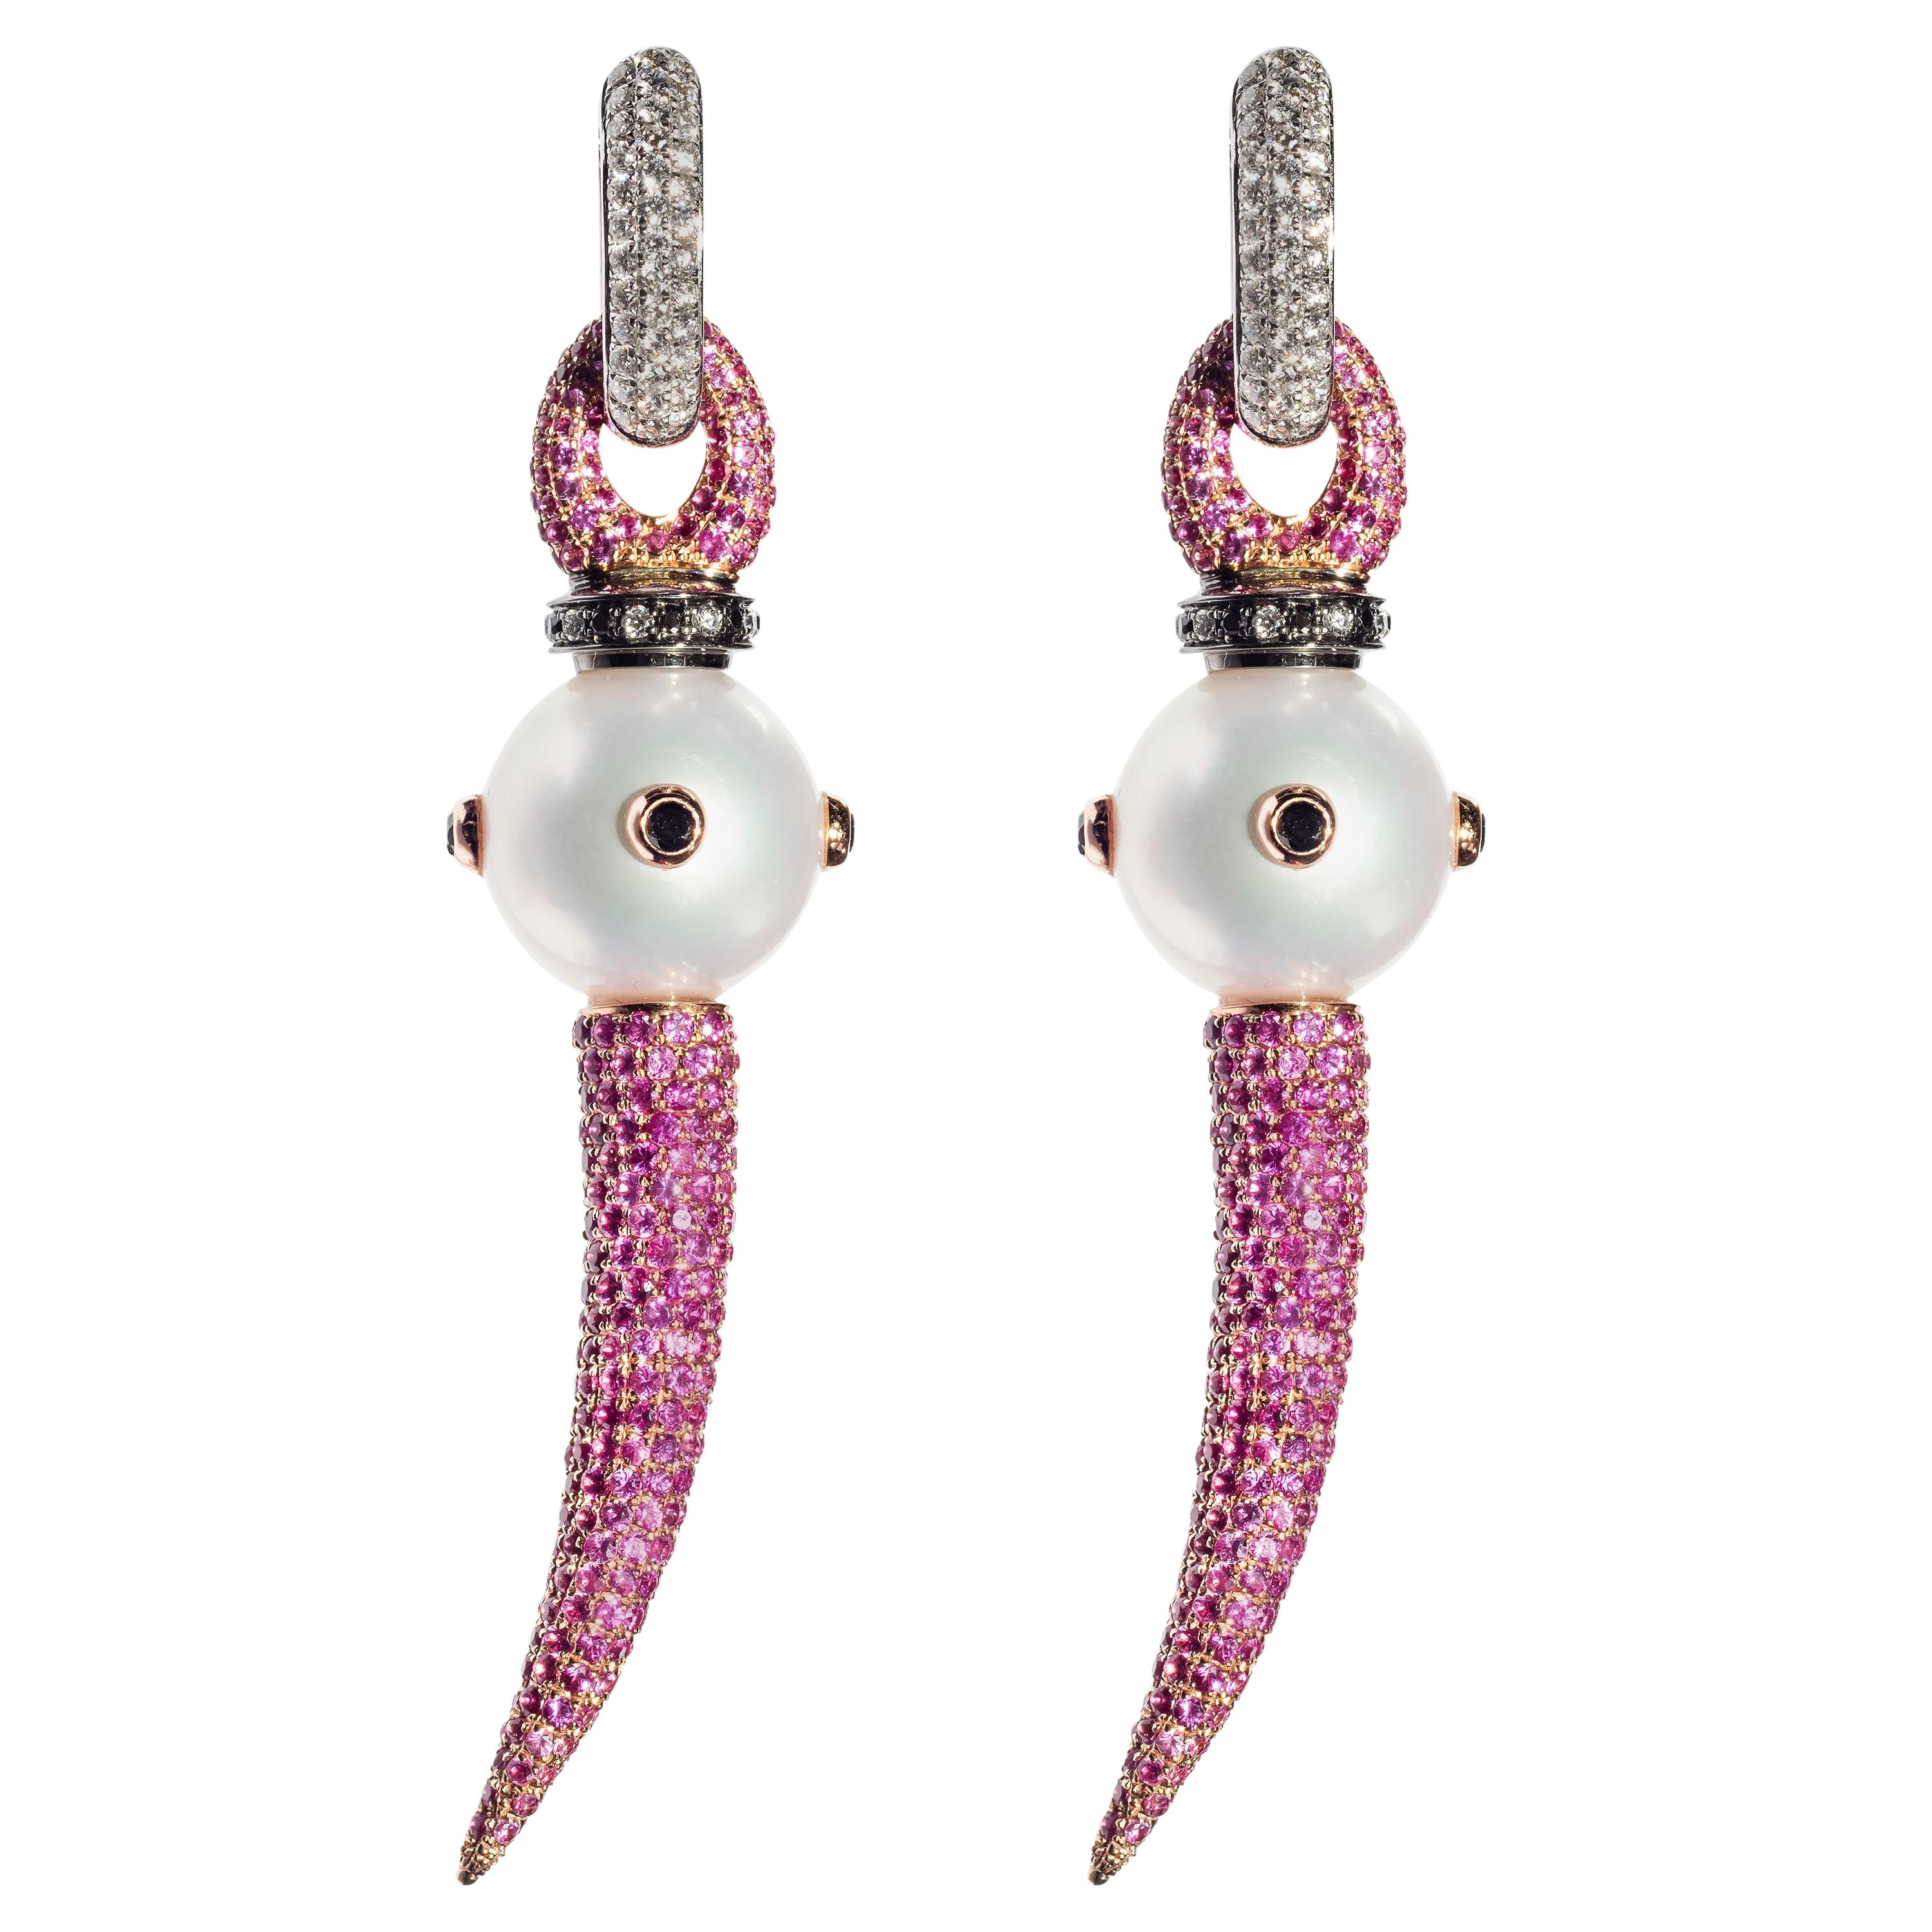 Rosa Van Parys Montana 2.0, 5.2 Carat Pink Sapphires and Pearl Earrings For Sale